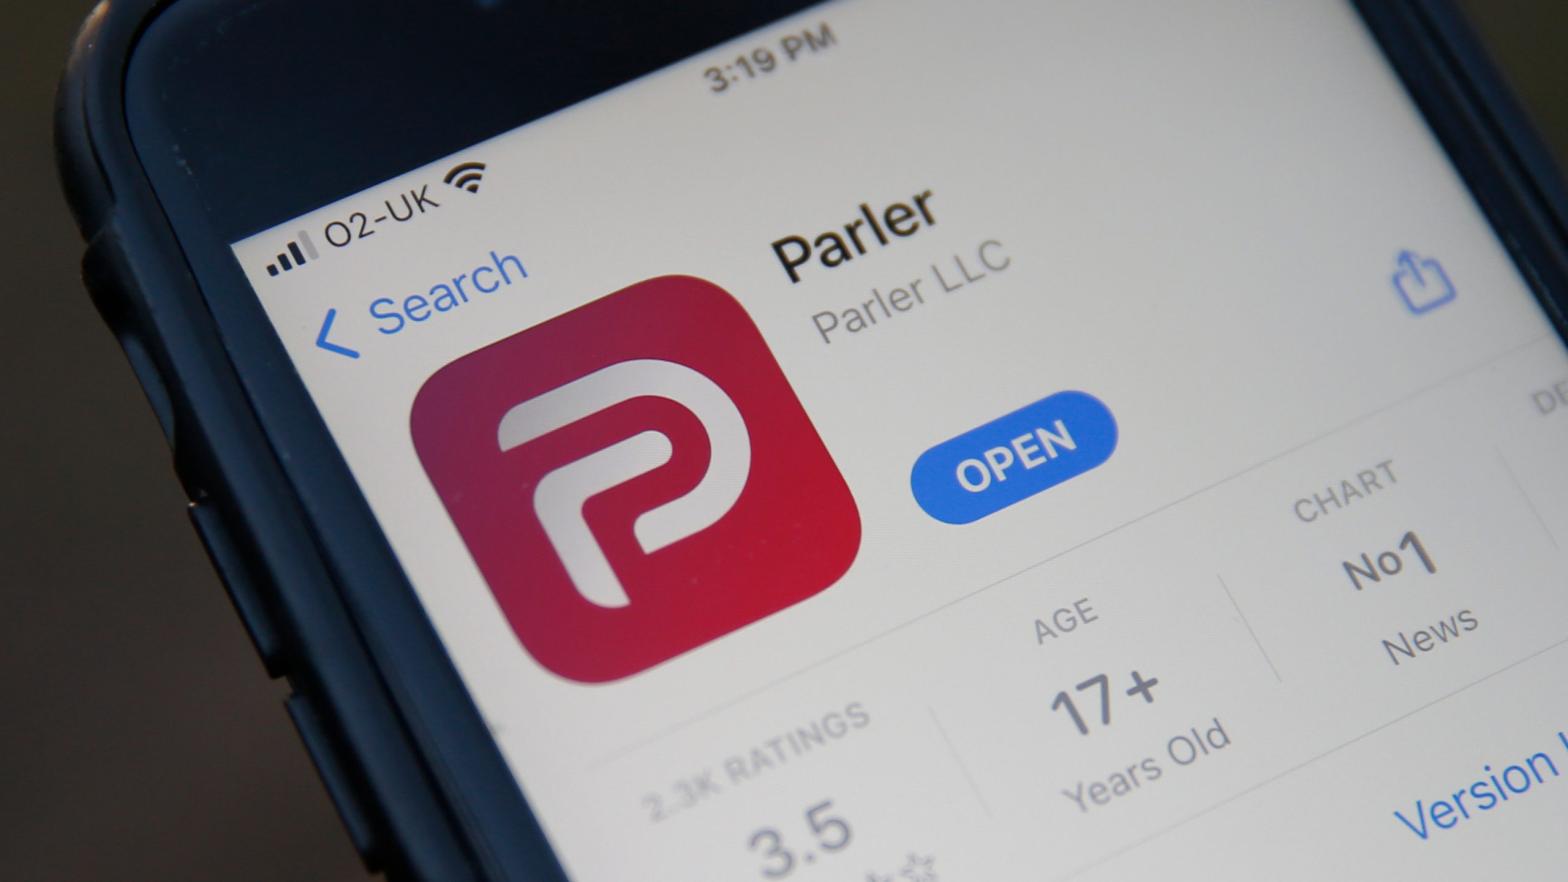 The Parler App popular with right-wing supporters has been suspended by Amazon store over continued postings by users that incite violence.  (Photo: Hollie Adams, Getty Images)